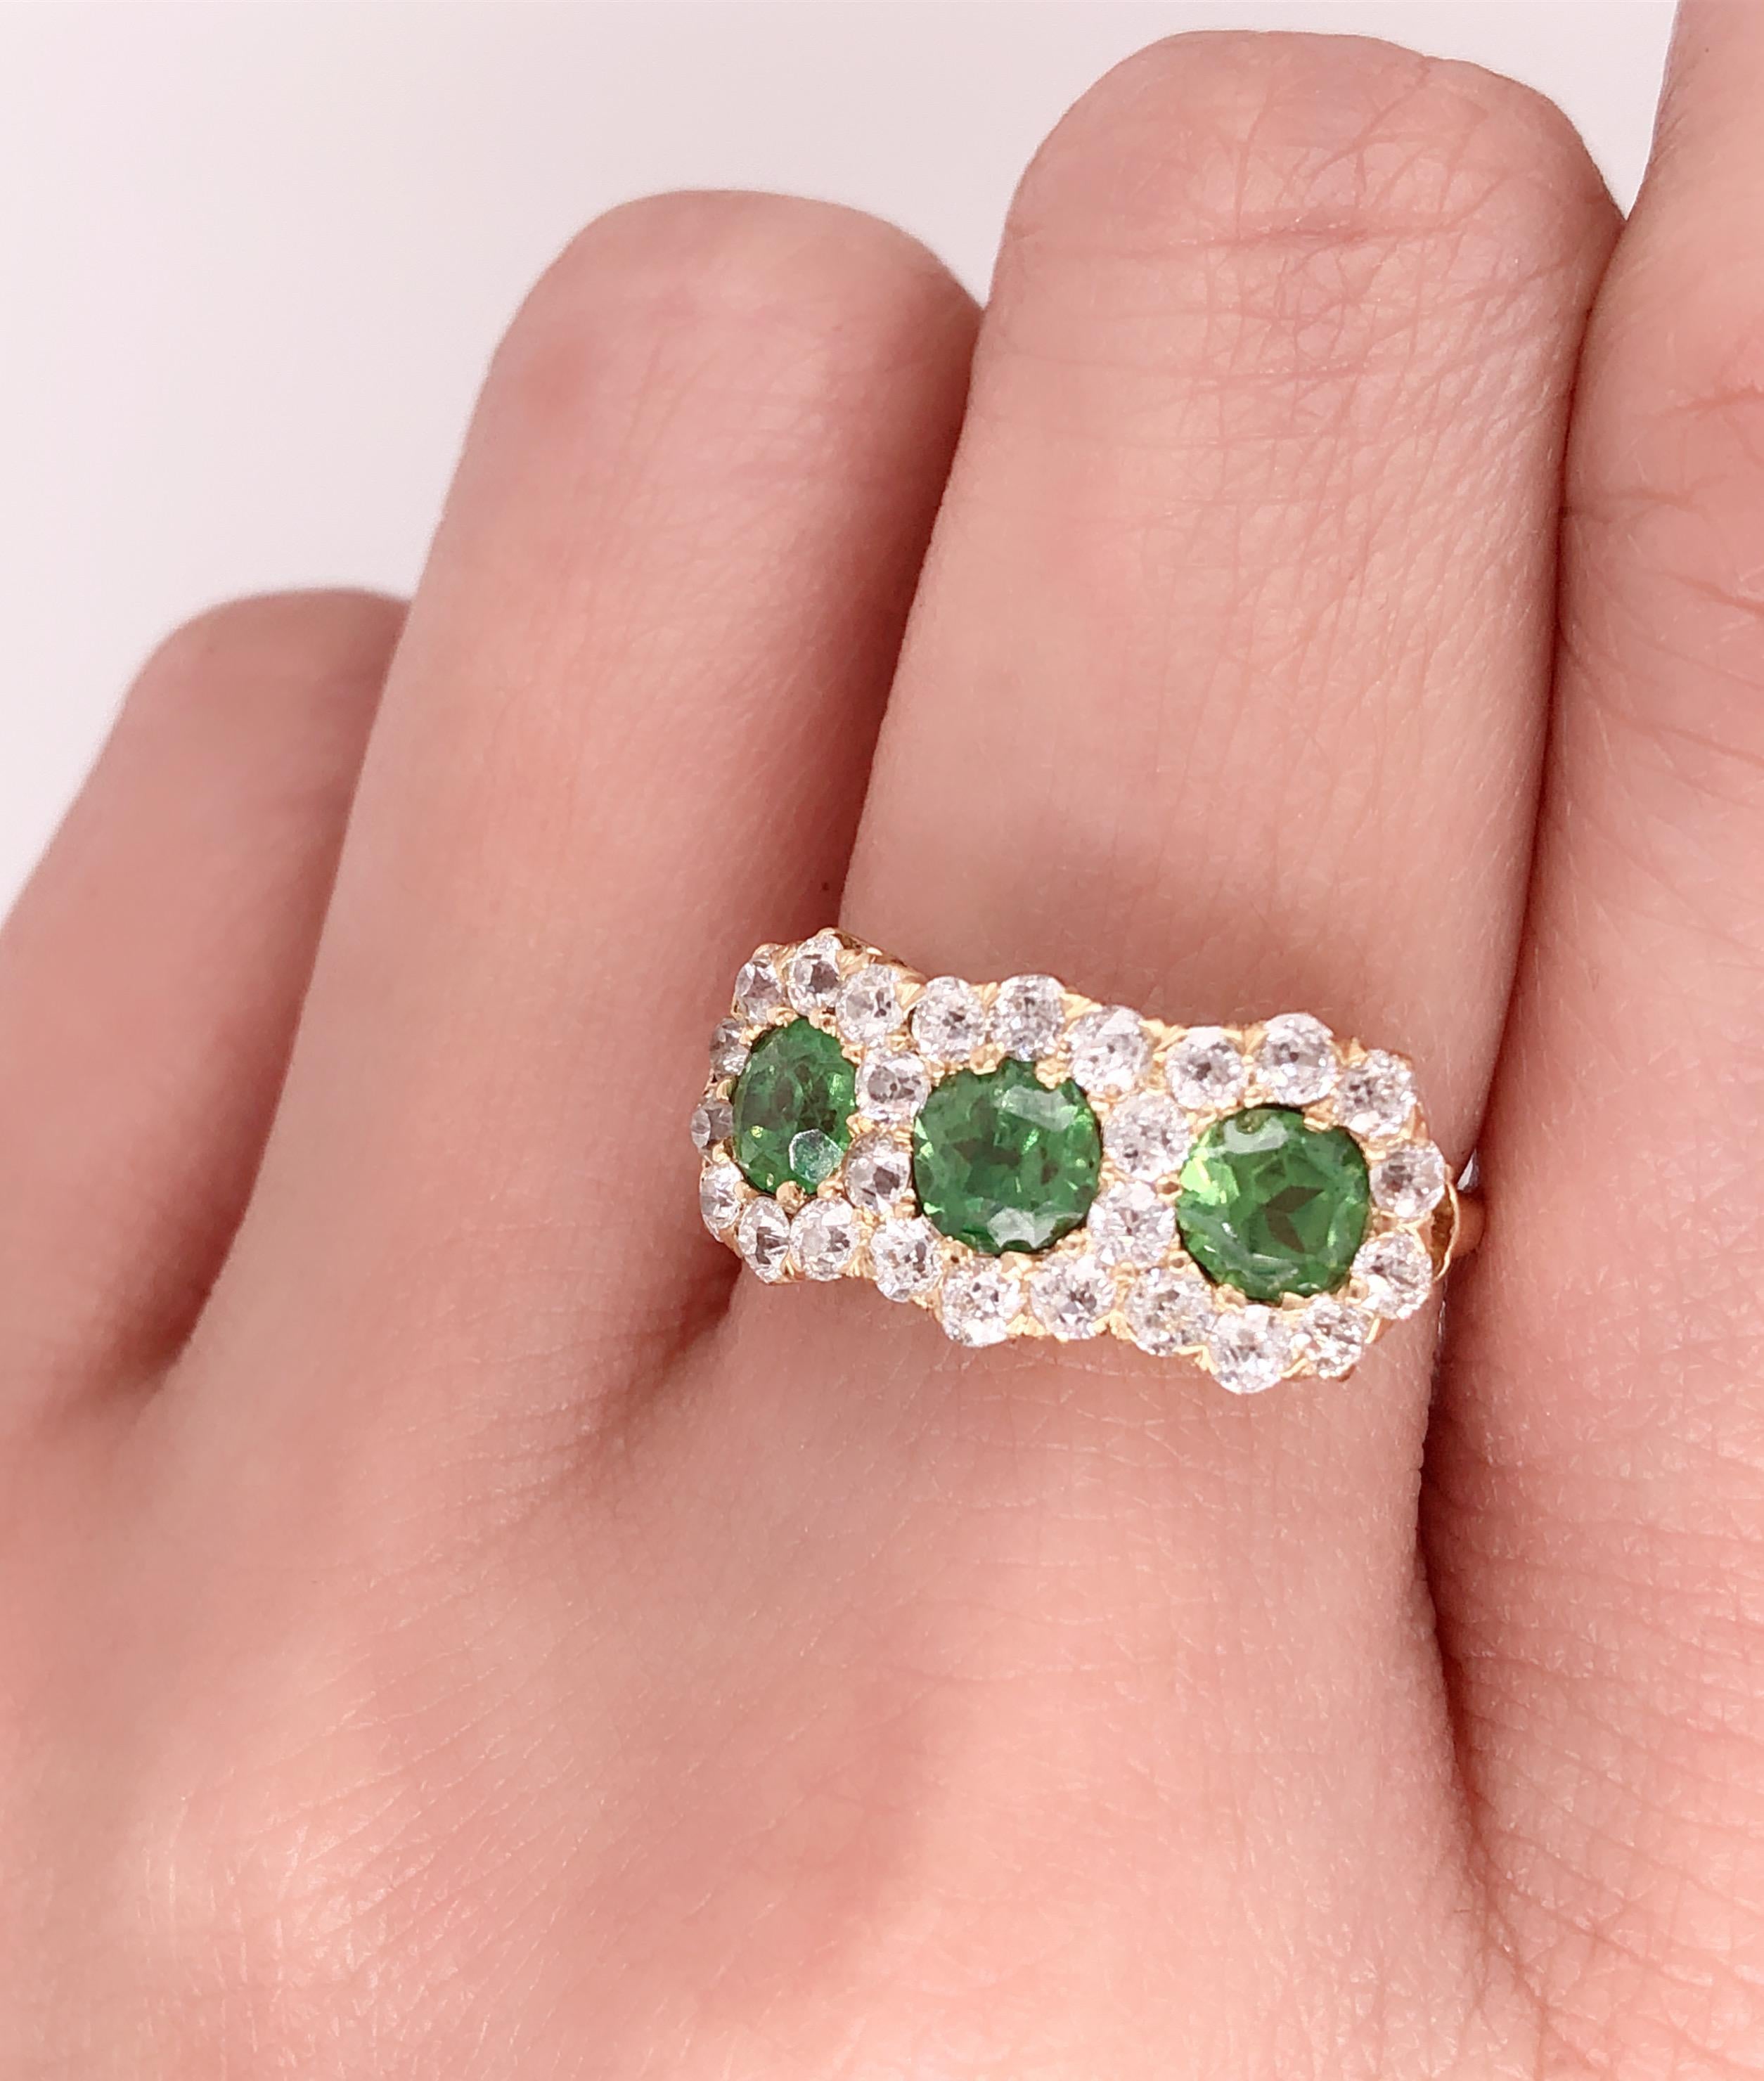 Three Stone Emerald & Diamond Modern Ring. . Housing approx. Three sixty point round emerald stones for a total of 1.8 ct. each flanked by a total group of 25 round diamonds approx .05 diamonds for a total 1.25 ct of diamonds. Ring Size